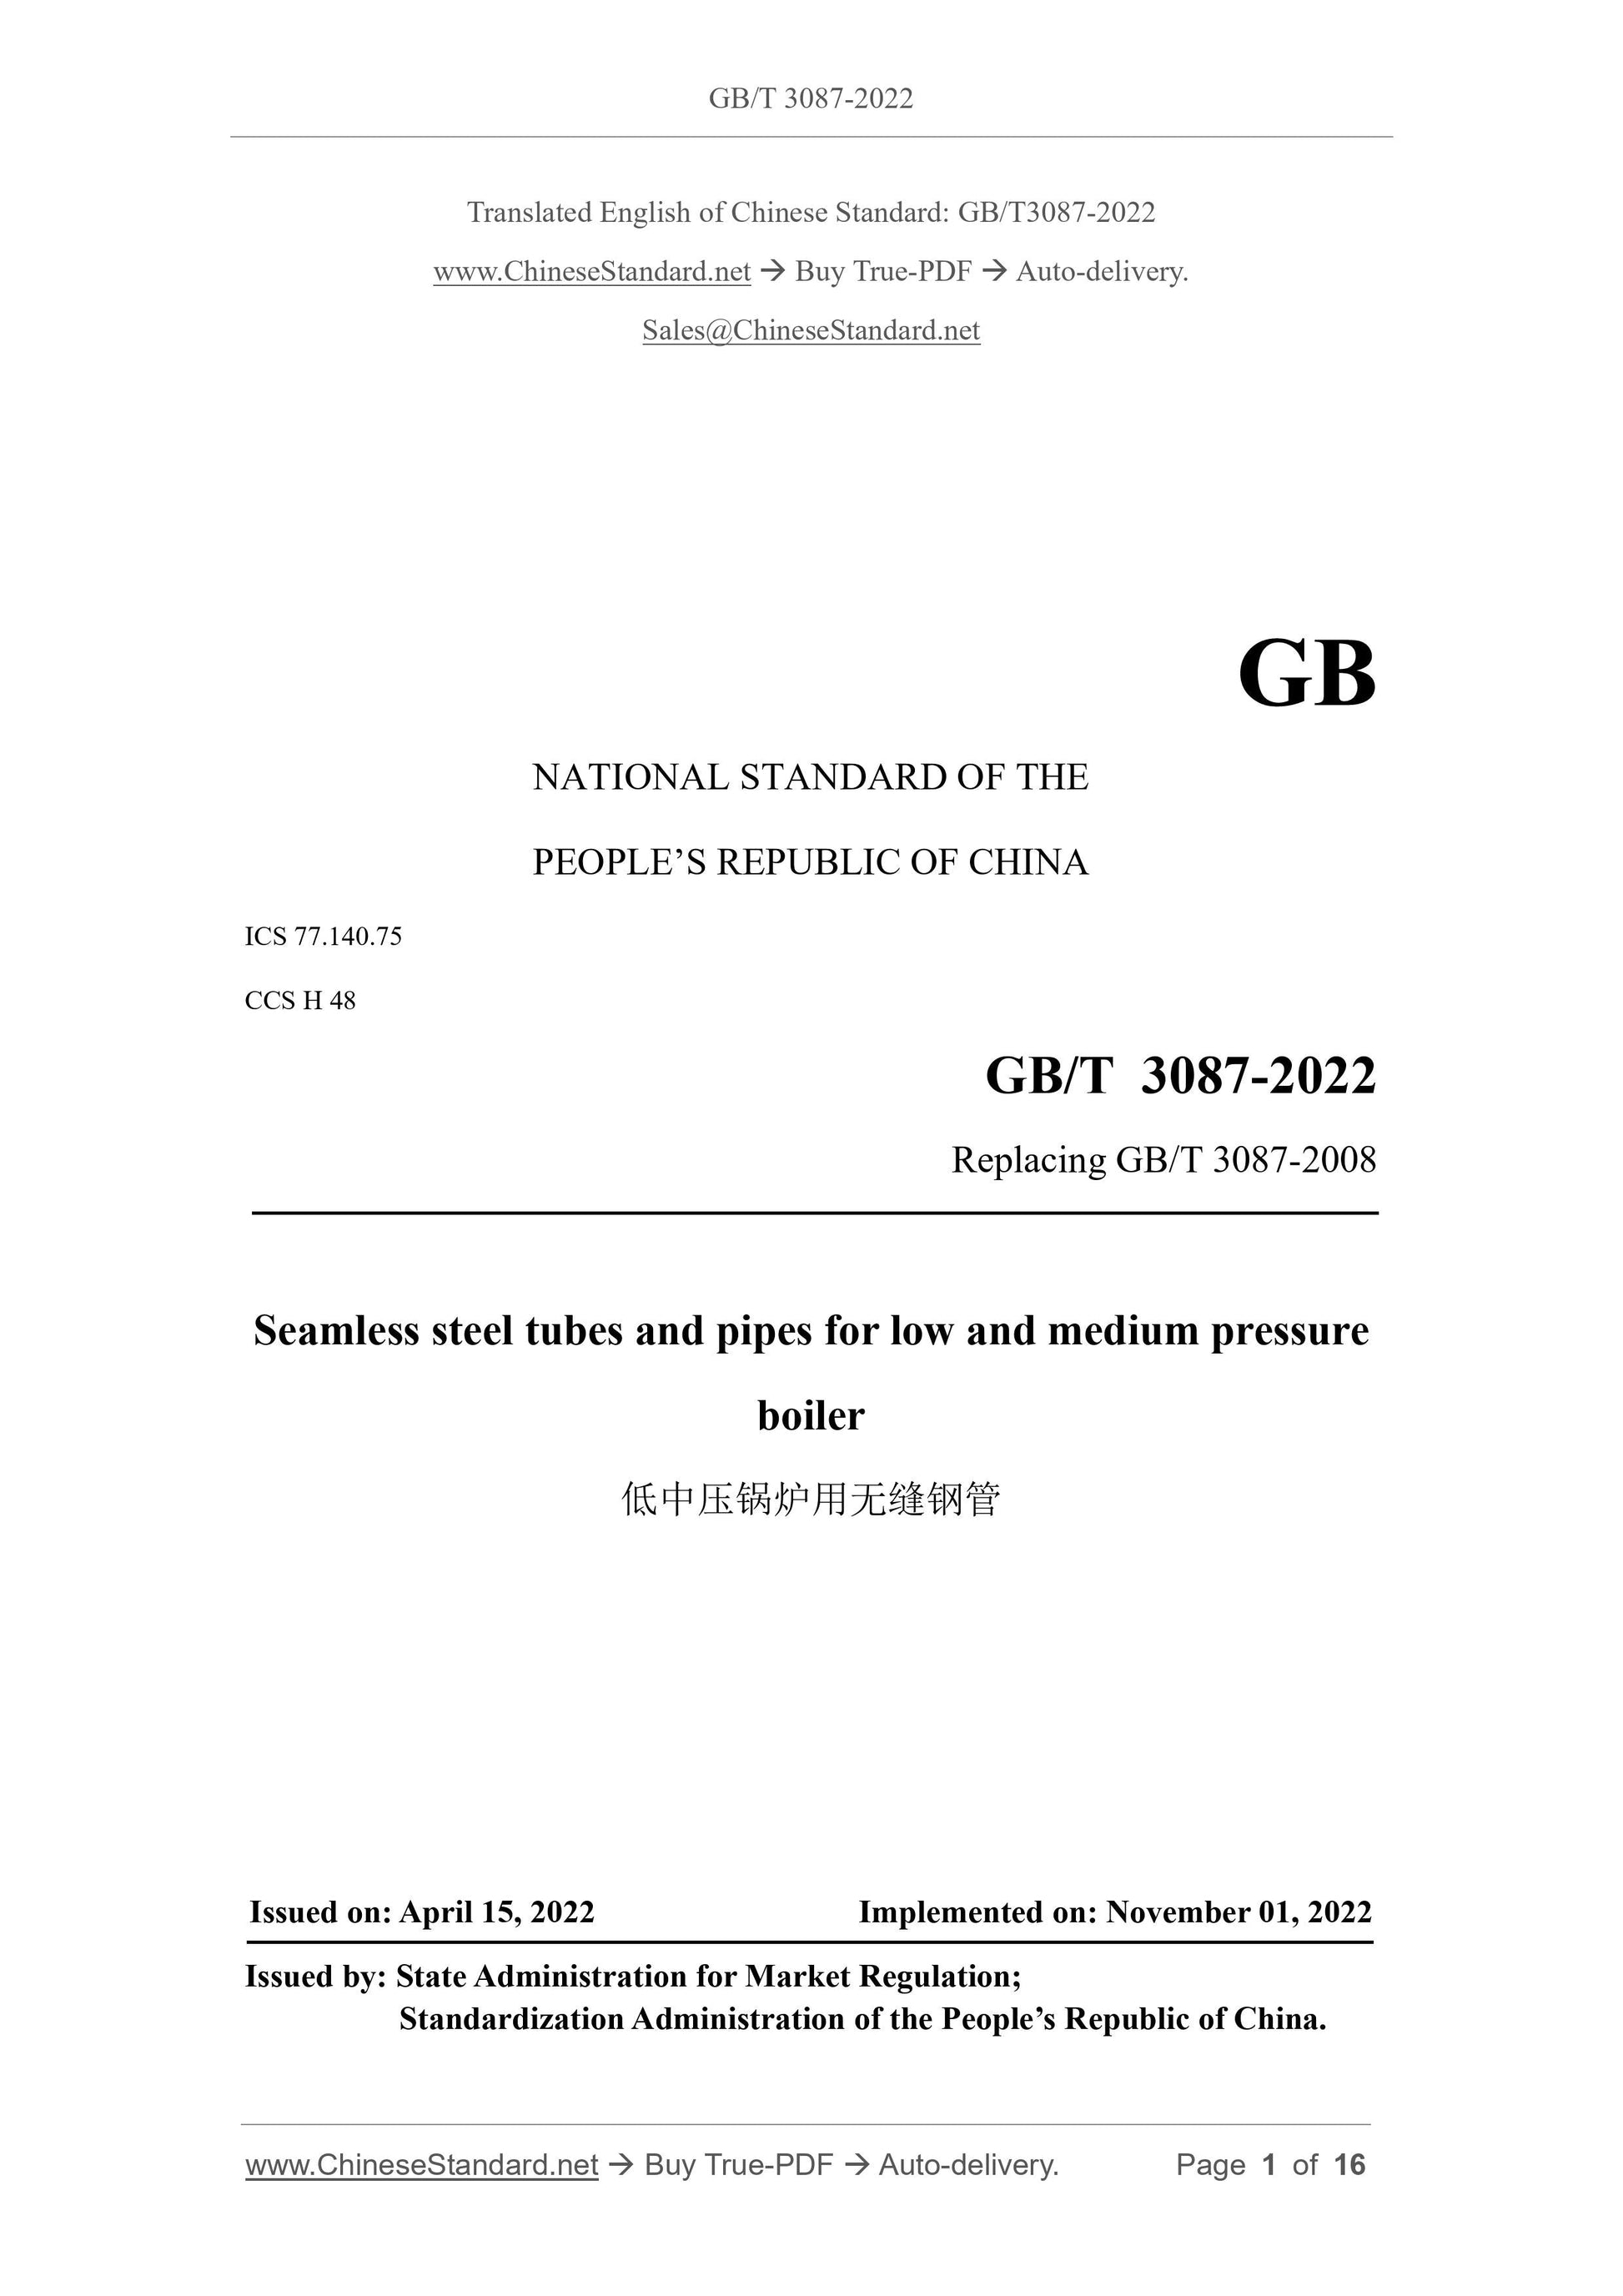 GB/T 3087-2022 Page 1